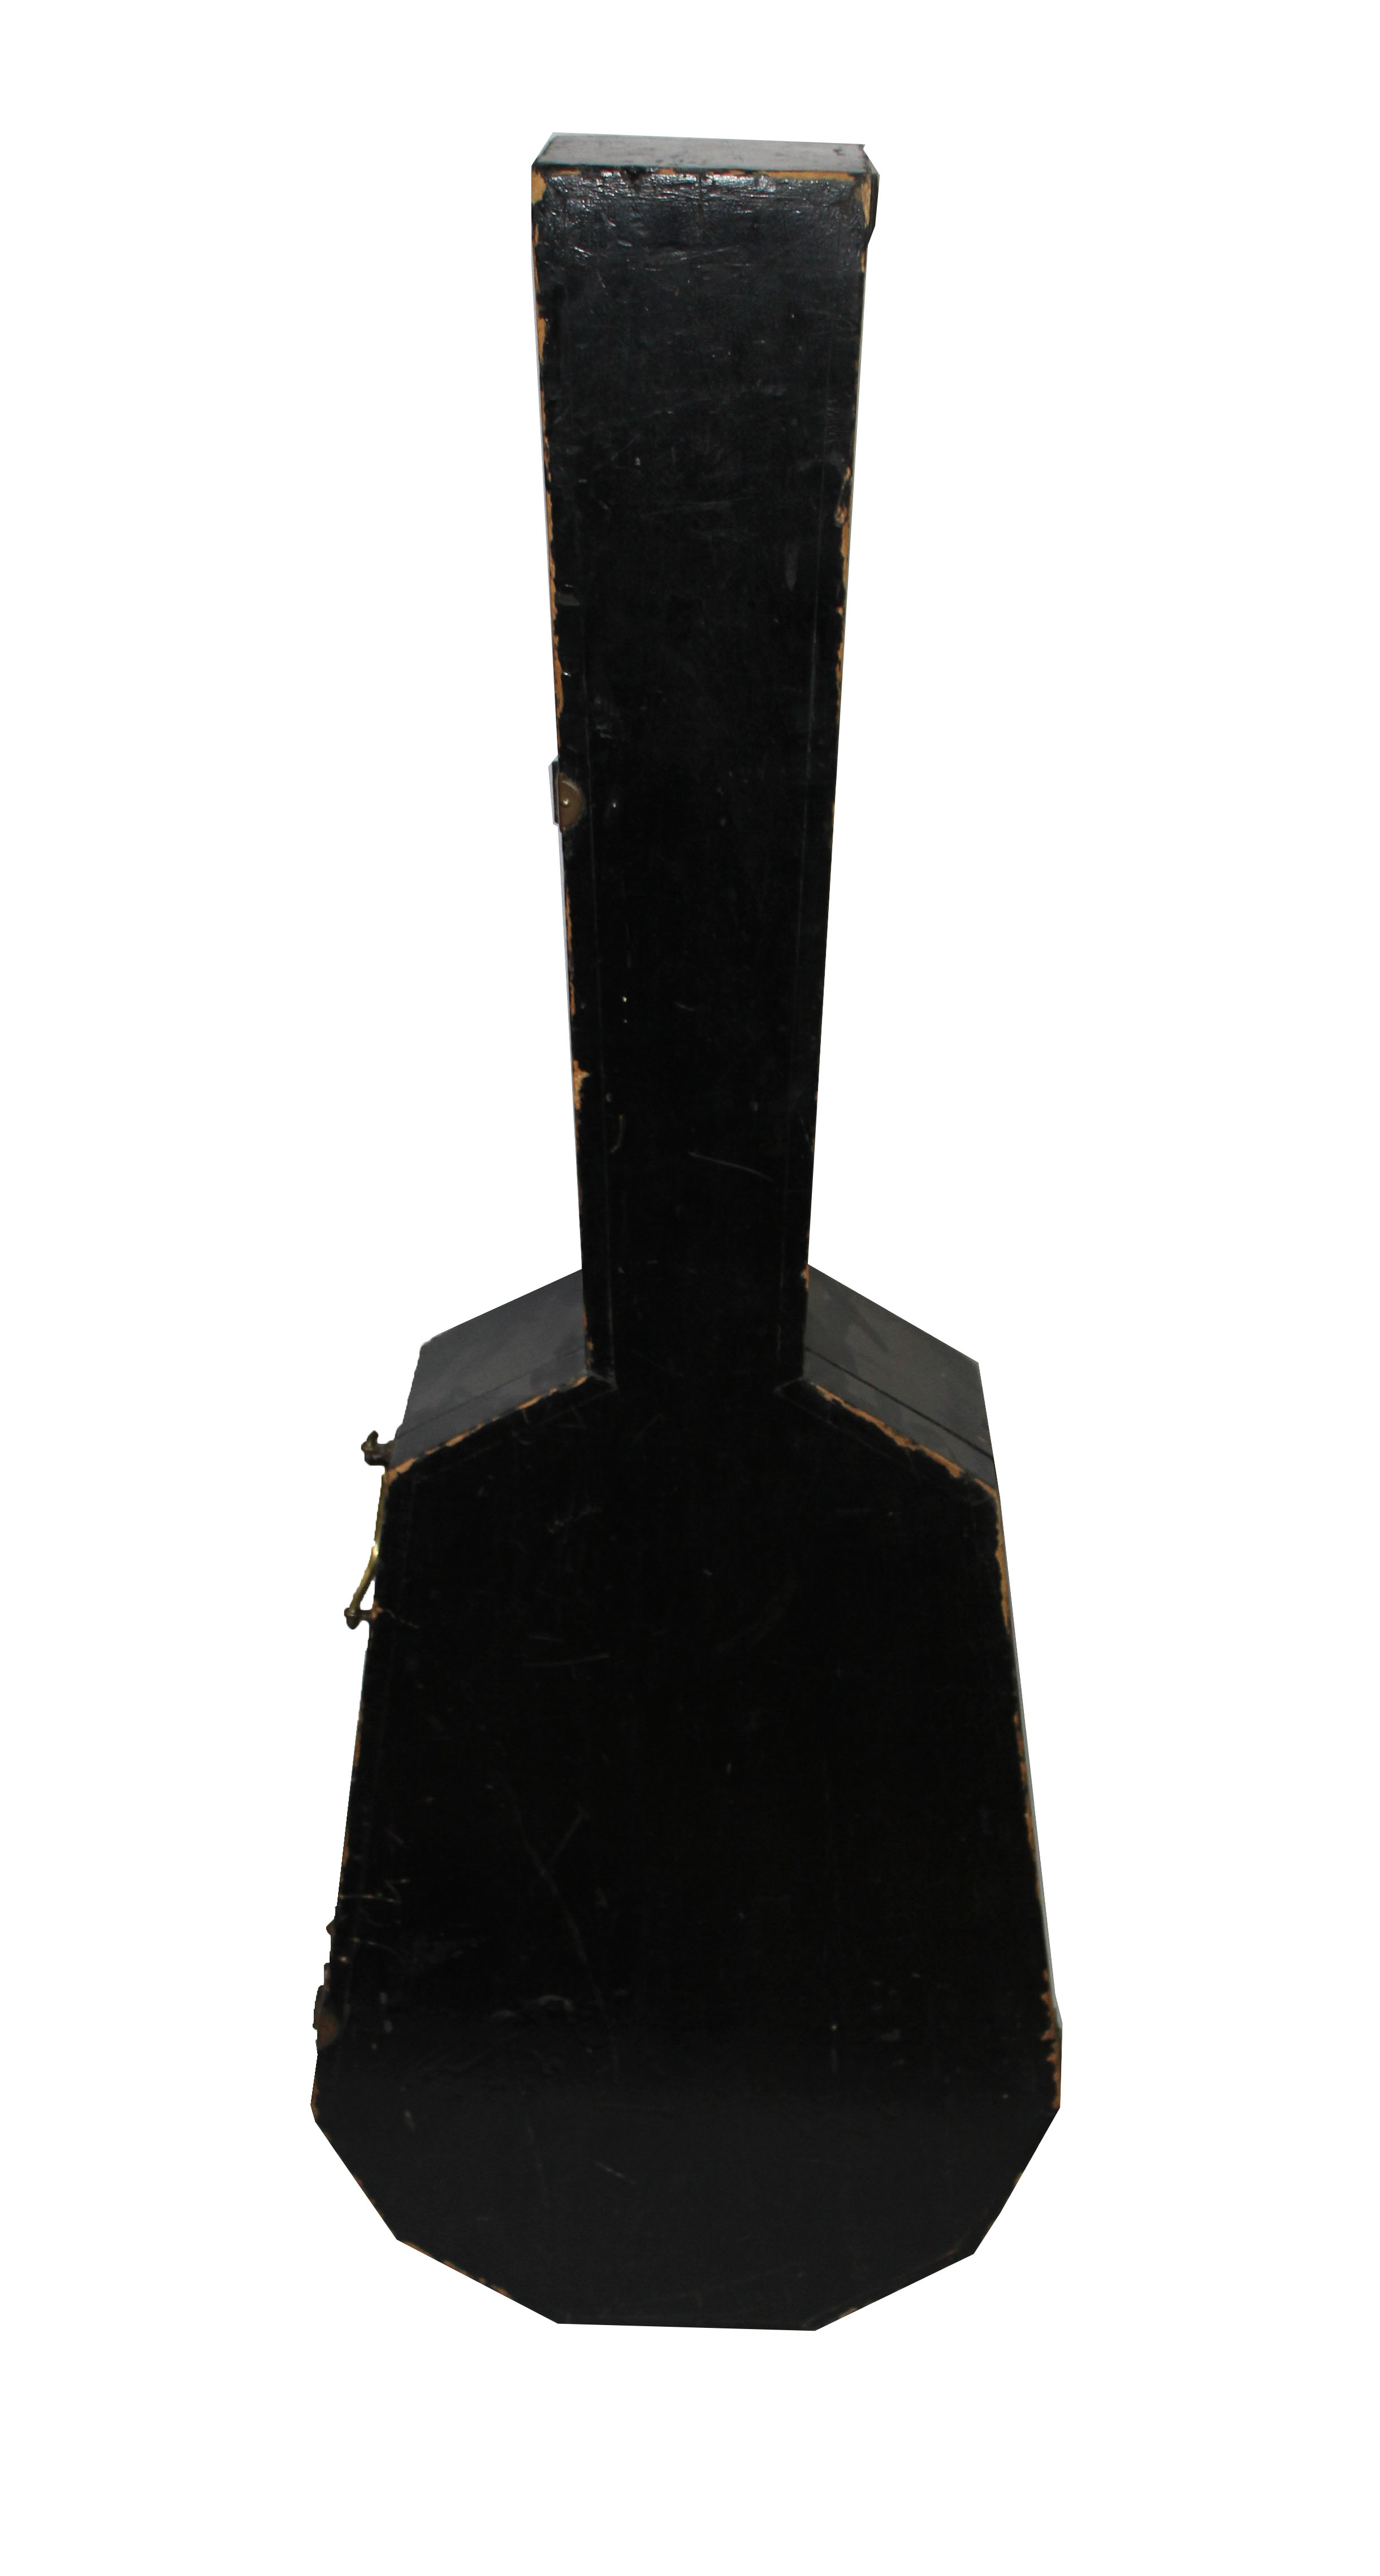 A 19TH CENTURY FRENCH PARLOUR GUITAR Complete with original wooden coffin case. - Image 2 of 11